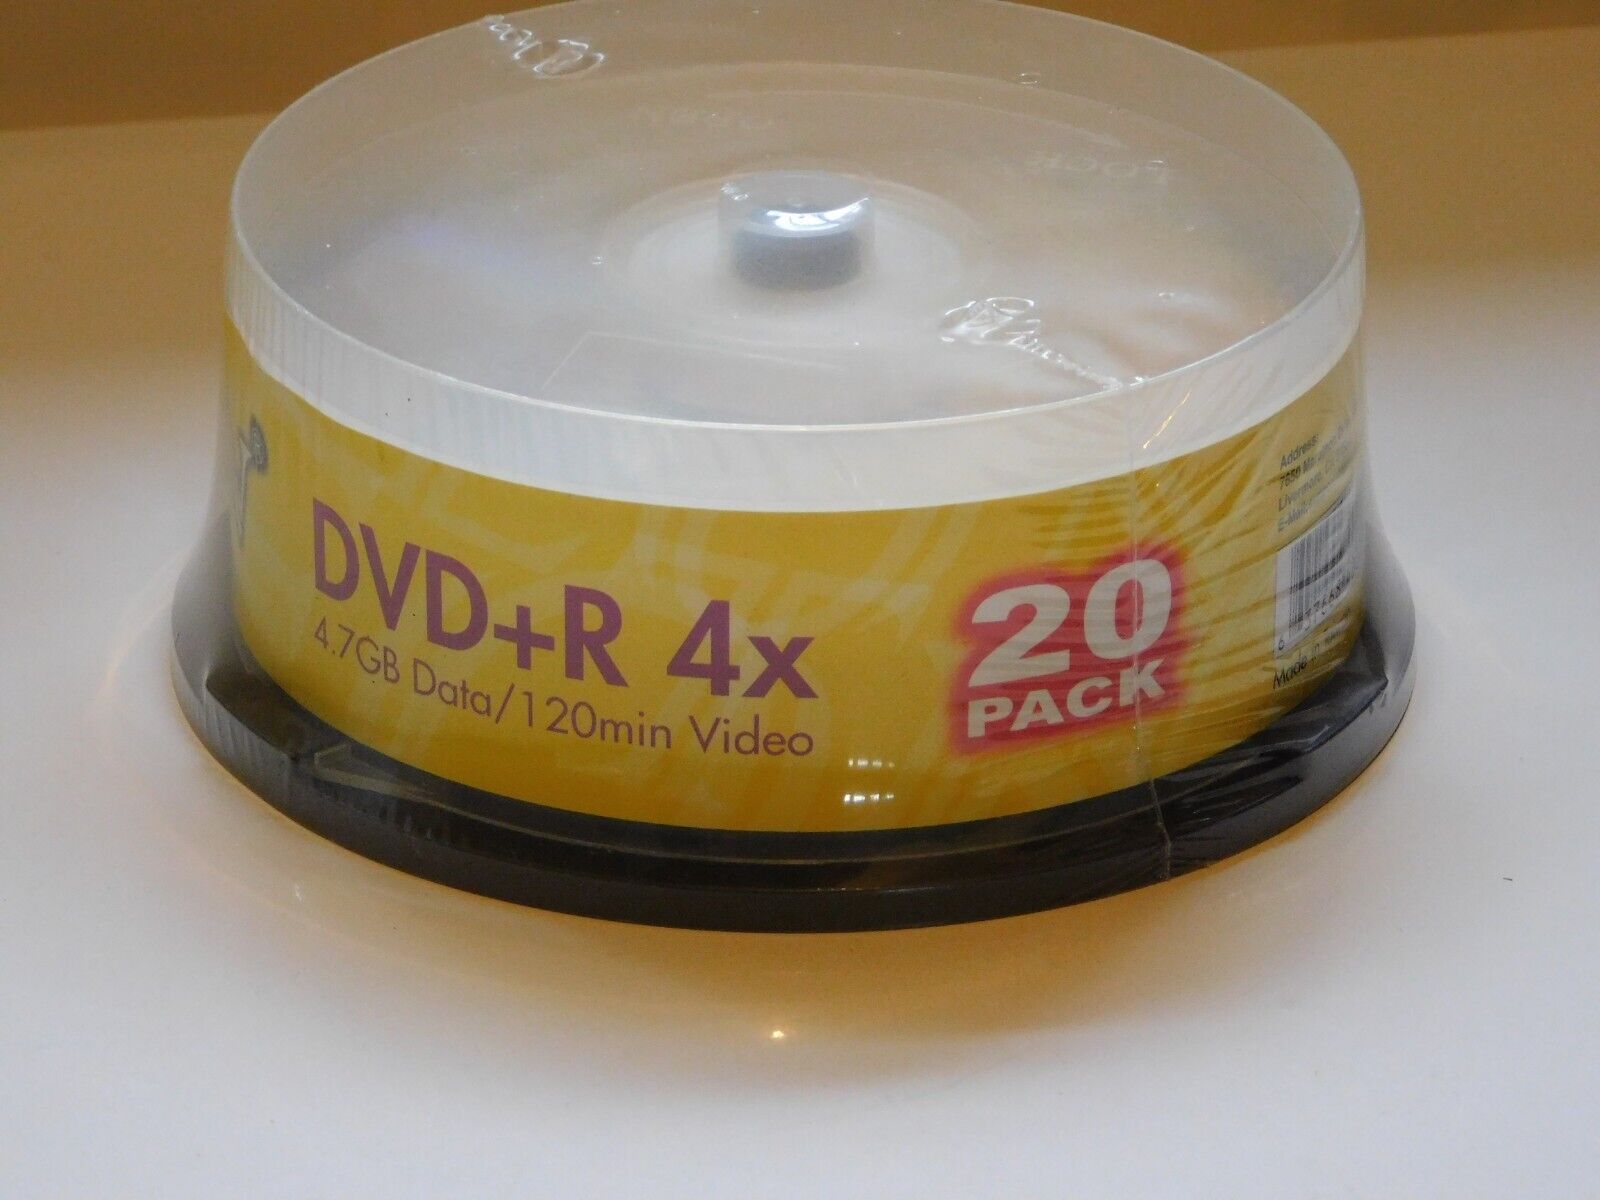 New Sealed 20 Pack Teon DVD+R 4x 4.7 GB Data 120 minutes Video Blank DVD+R Discs